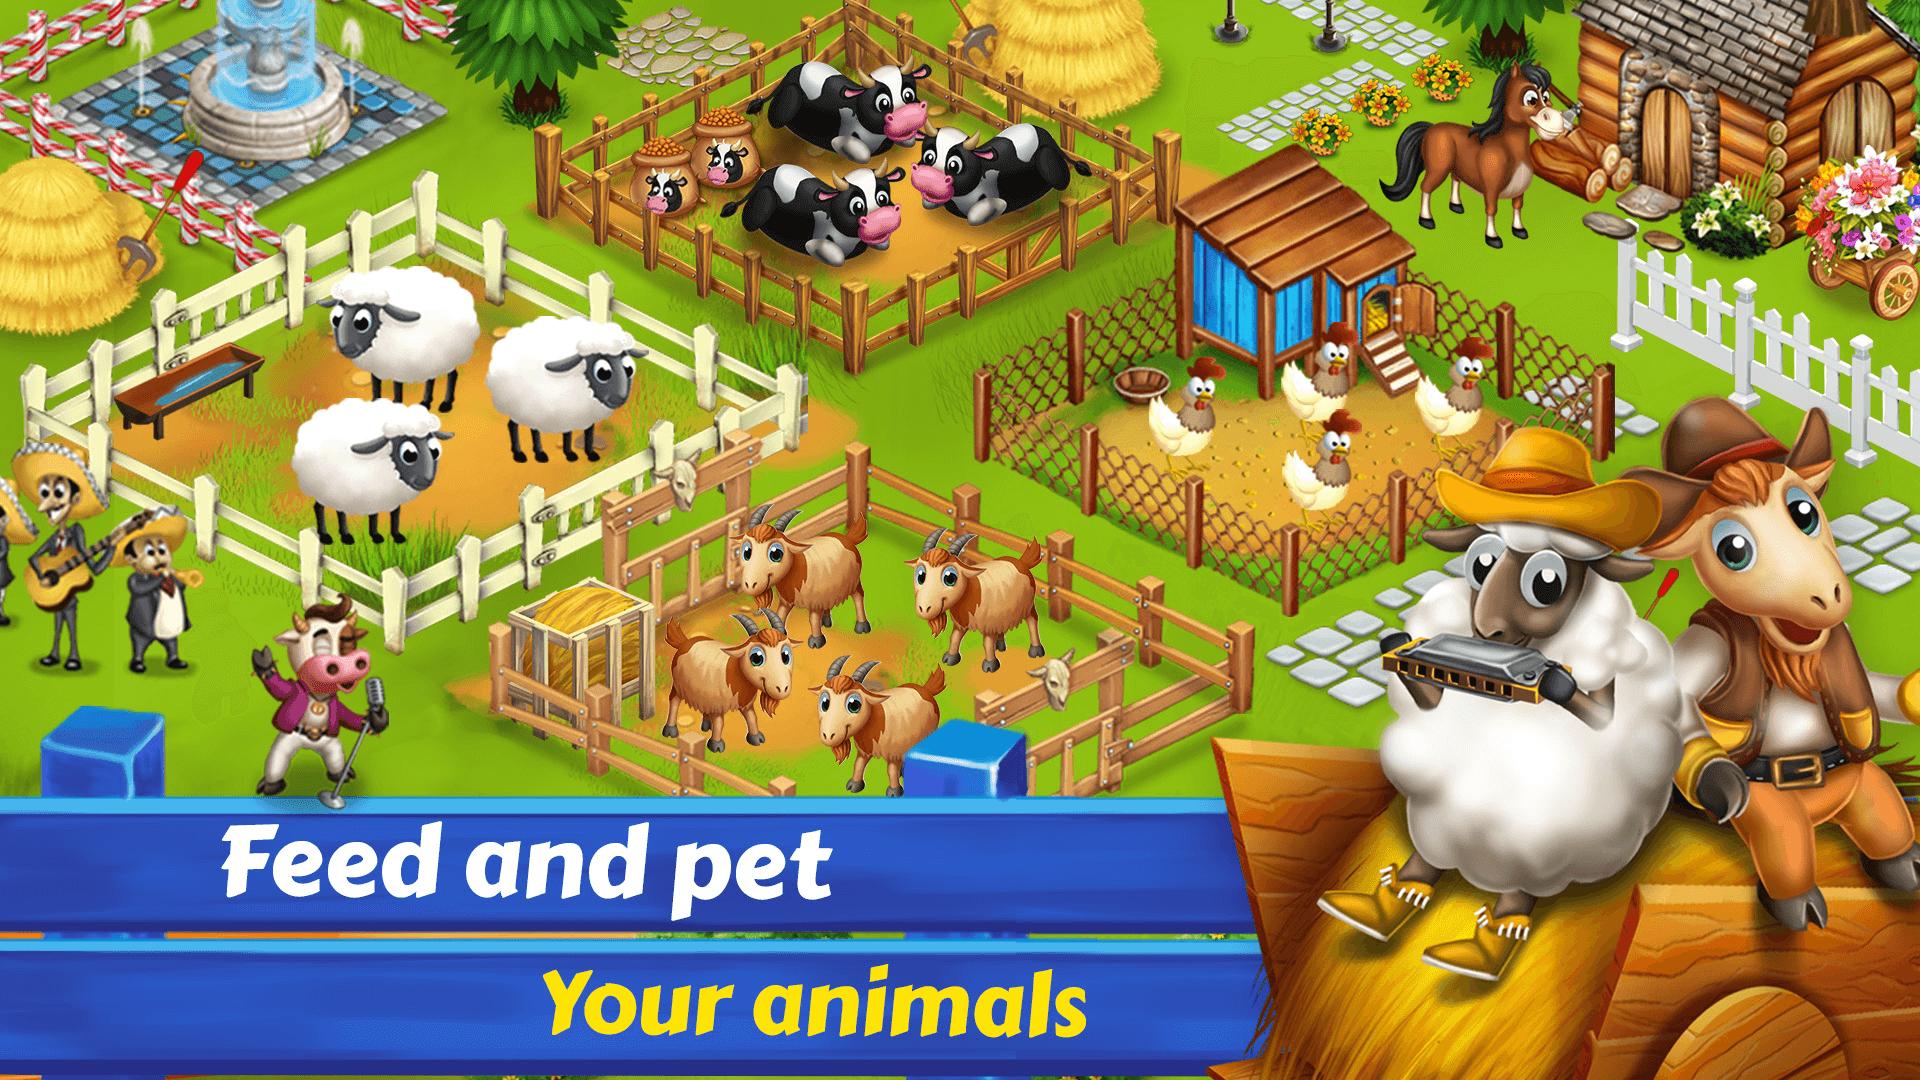 Big Little Farmer For Android Apk Download - roblox egg farm simulator game easy cheat free fire 2019 android